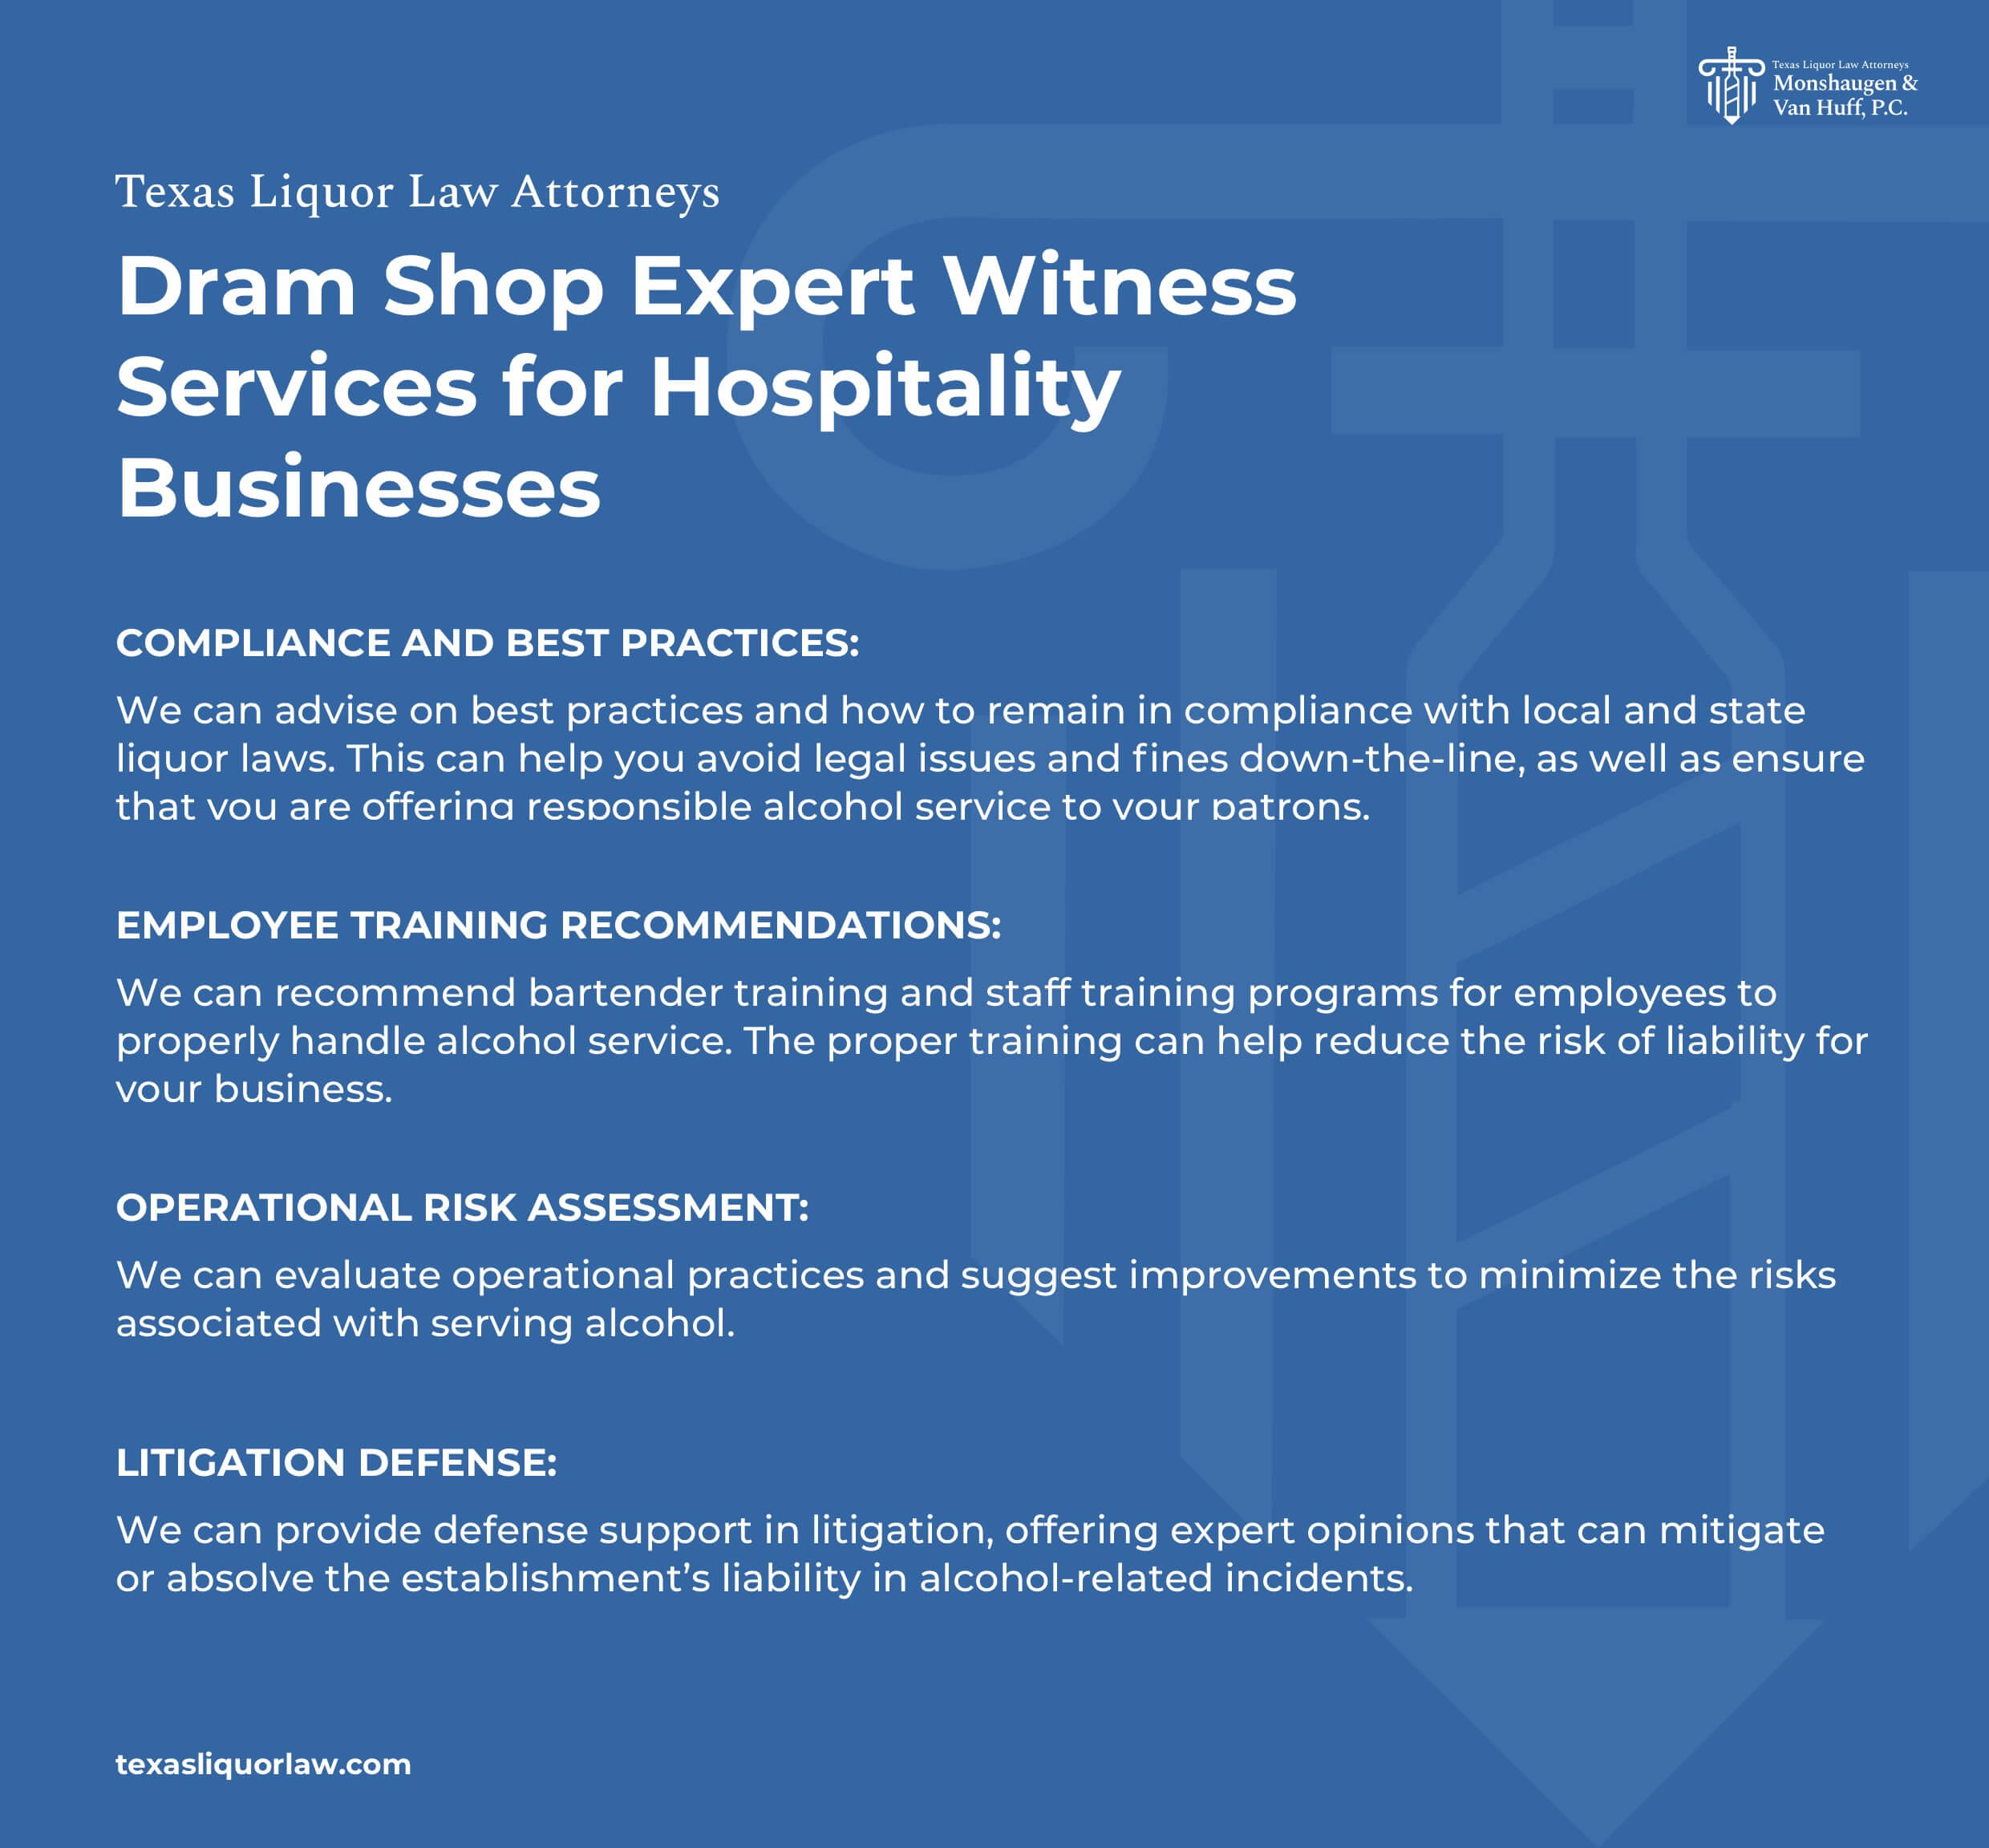 Dram Shop Expert Witness Services For Hospitality Businesses